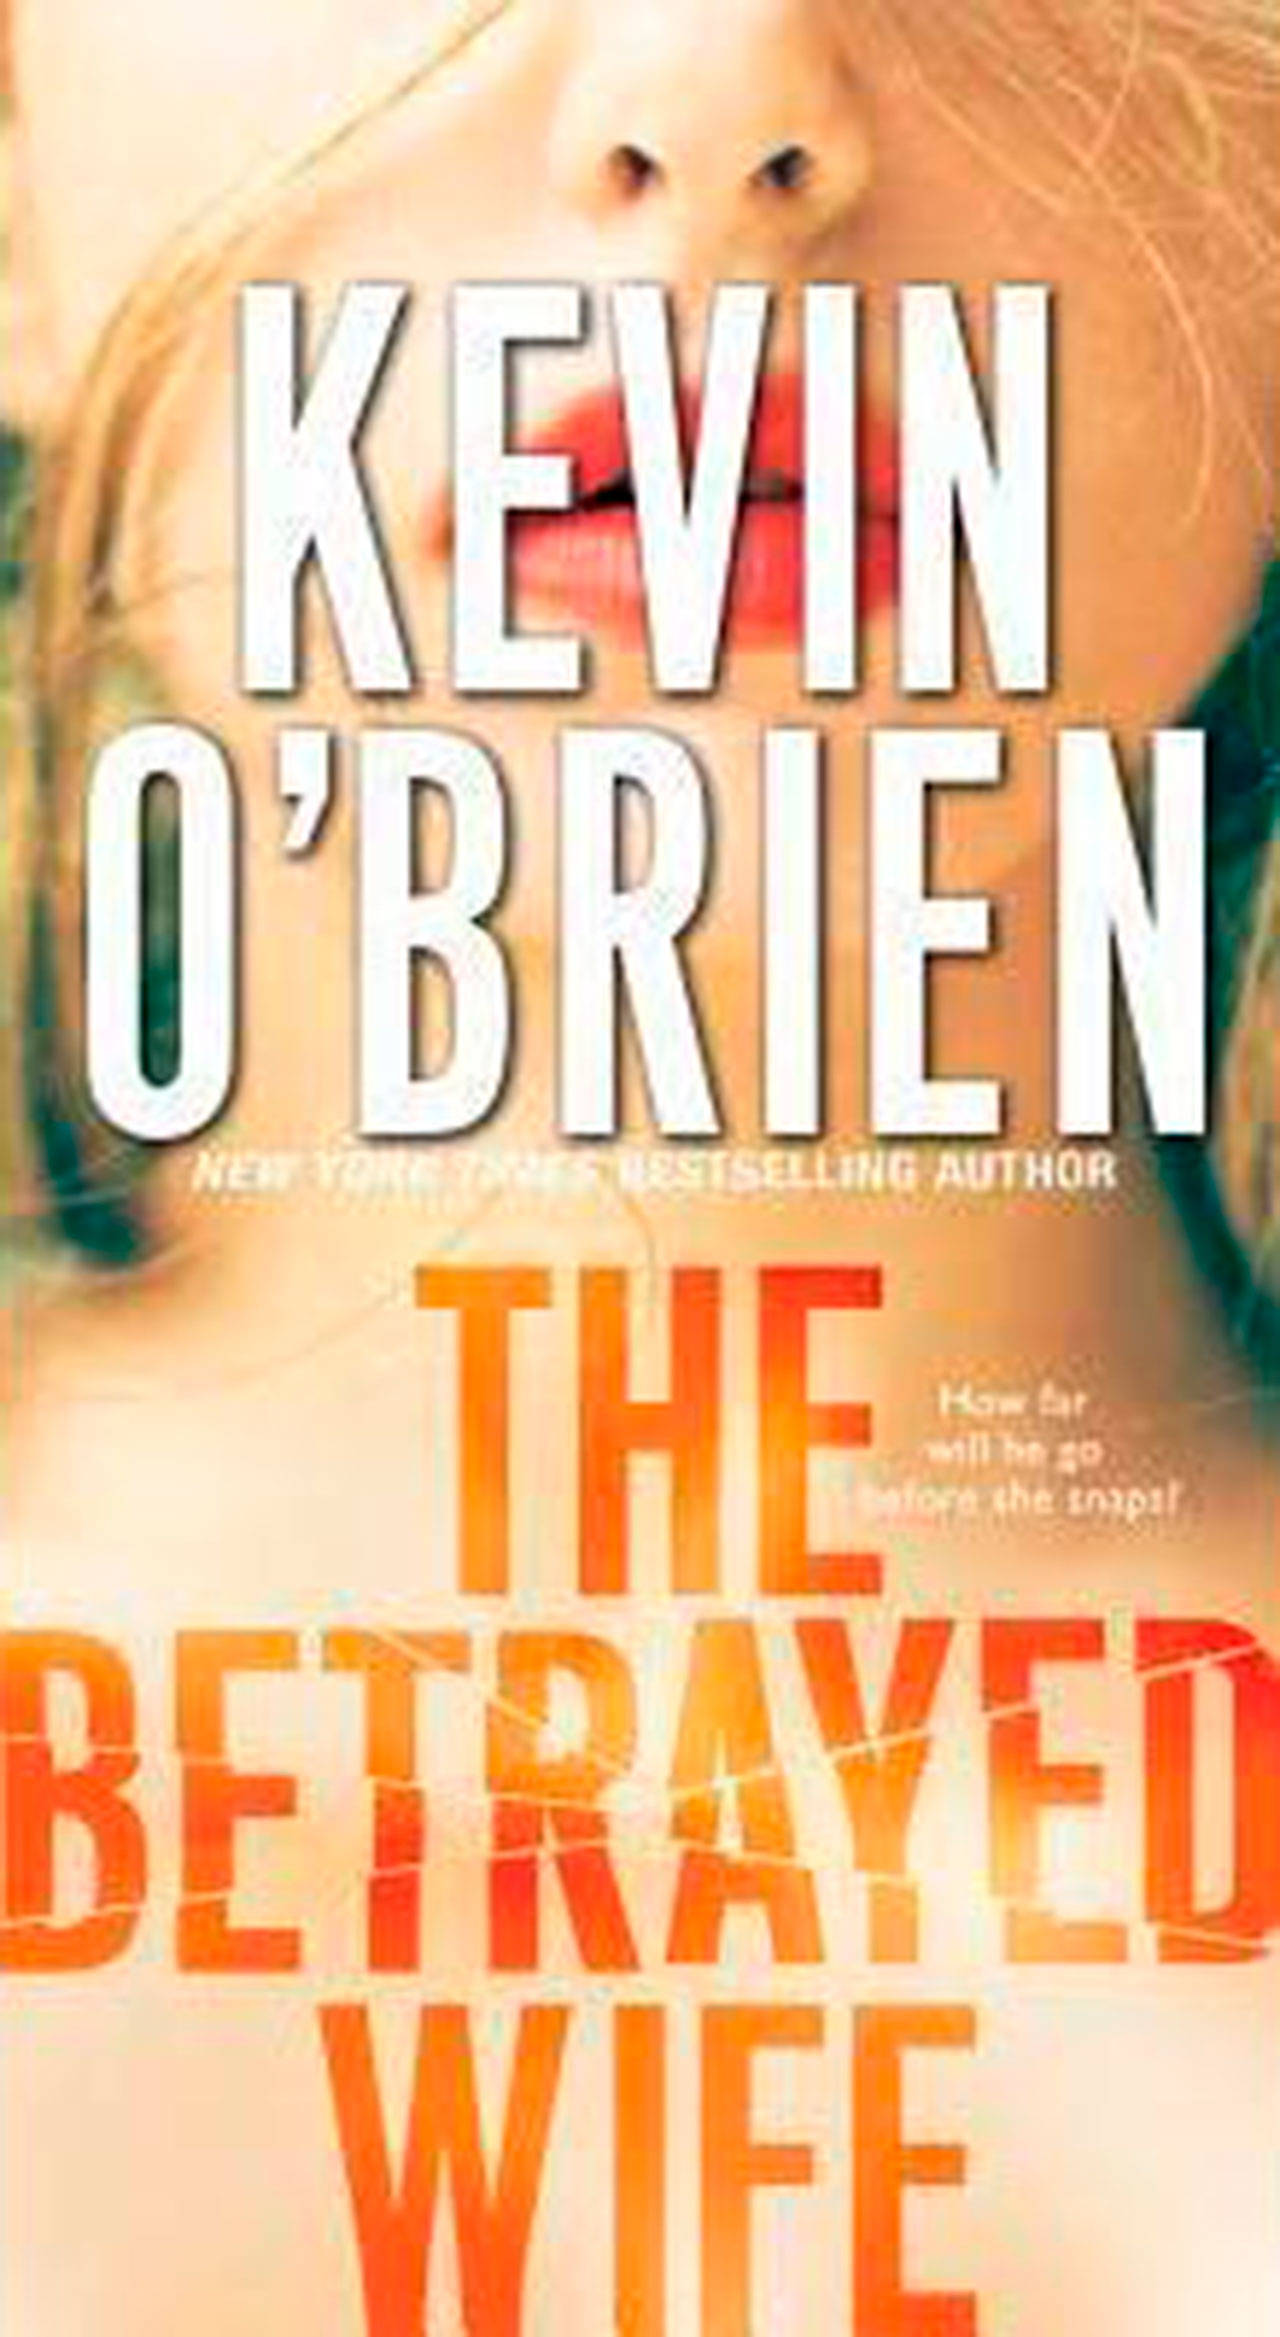 Image courtesy of Eagle Harbor Book Company | Seattle-based thriller writer Kevin O’Brien will visit Eagle Harbor Book Company at 6:30 p.m. Thursday, Aug. 29 to discuss his latest novel “The Betrayed Wife.”